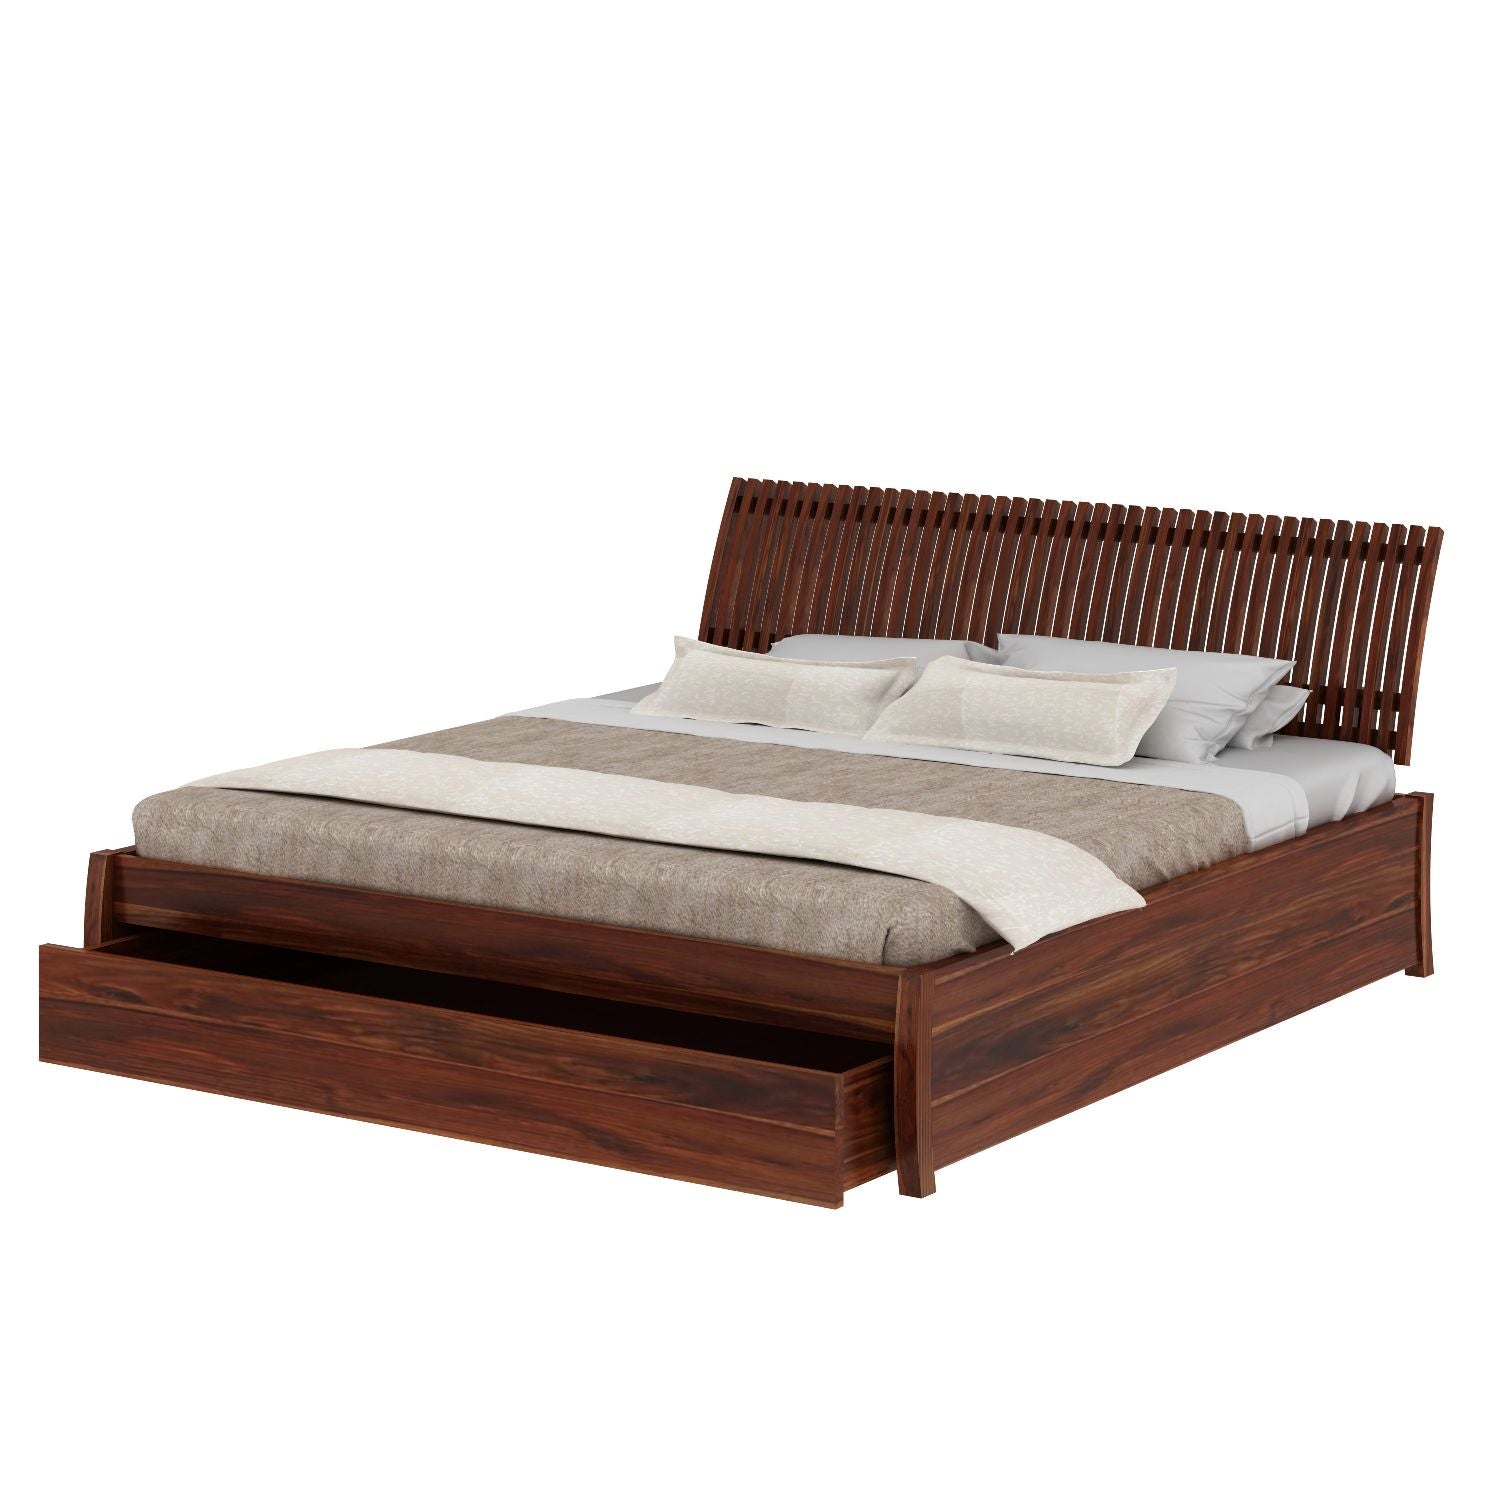 Dumdum Solid Sheesham Wood Bed With One Drawer (King Size, Natural Finish)